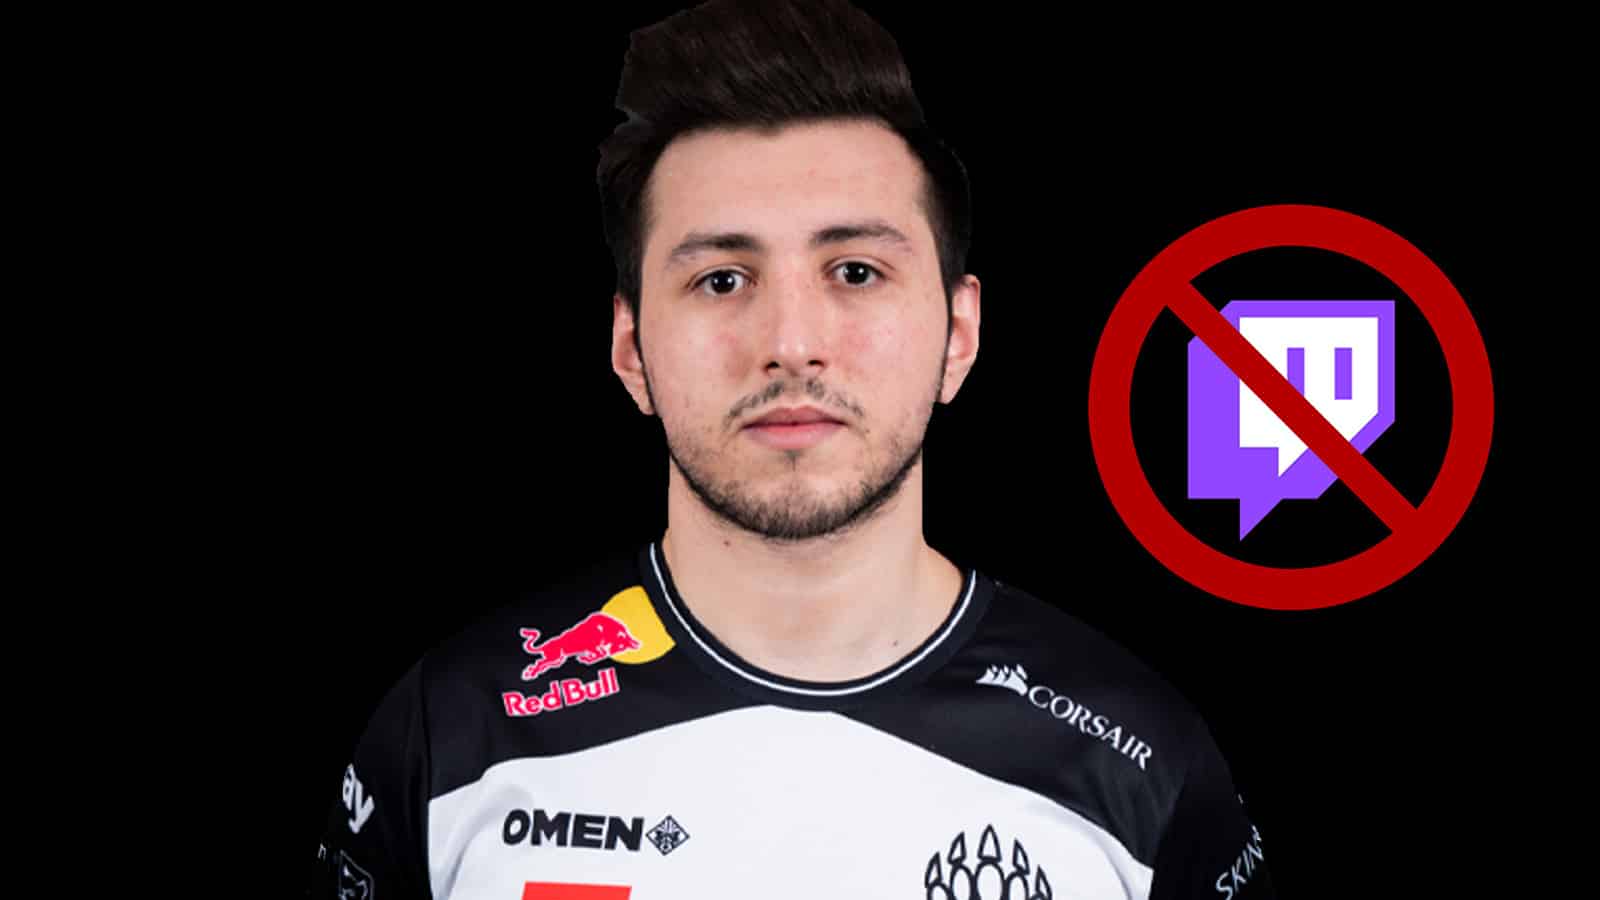 XANTARES banned from Twitch